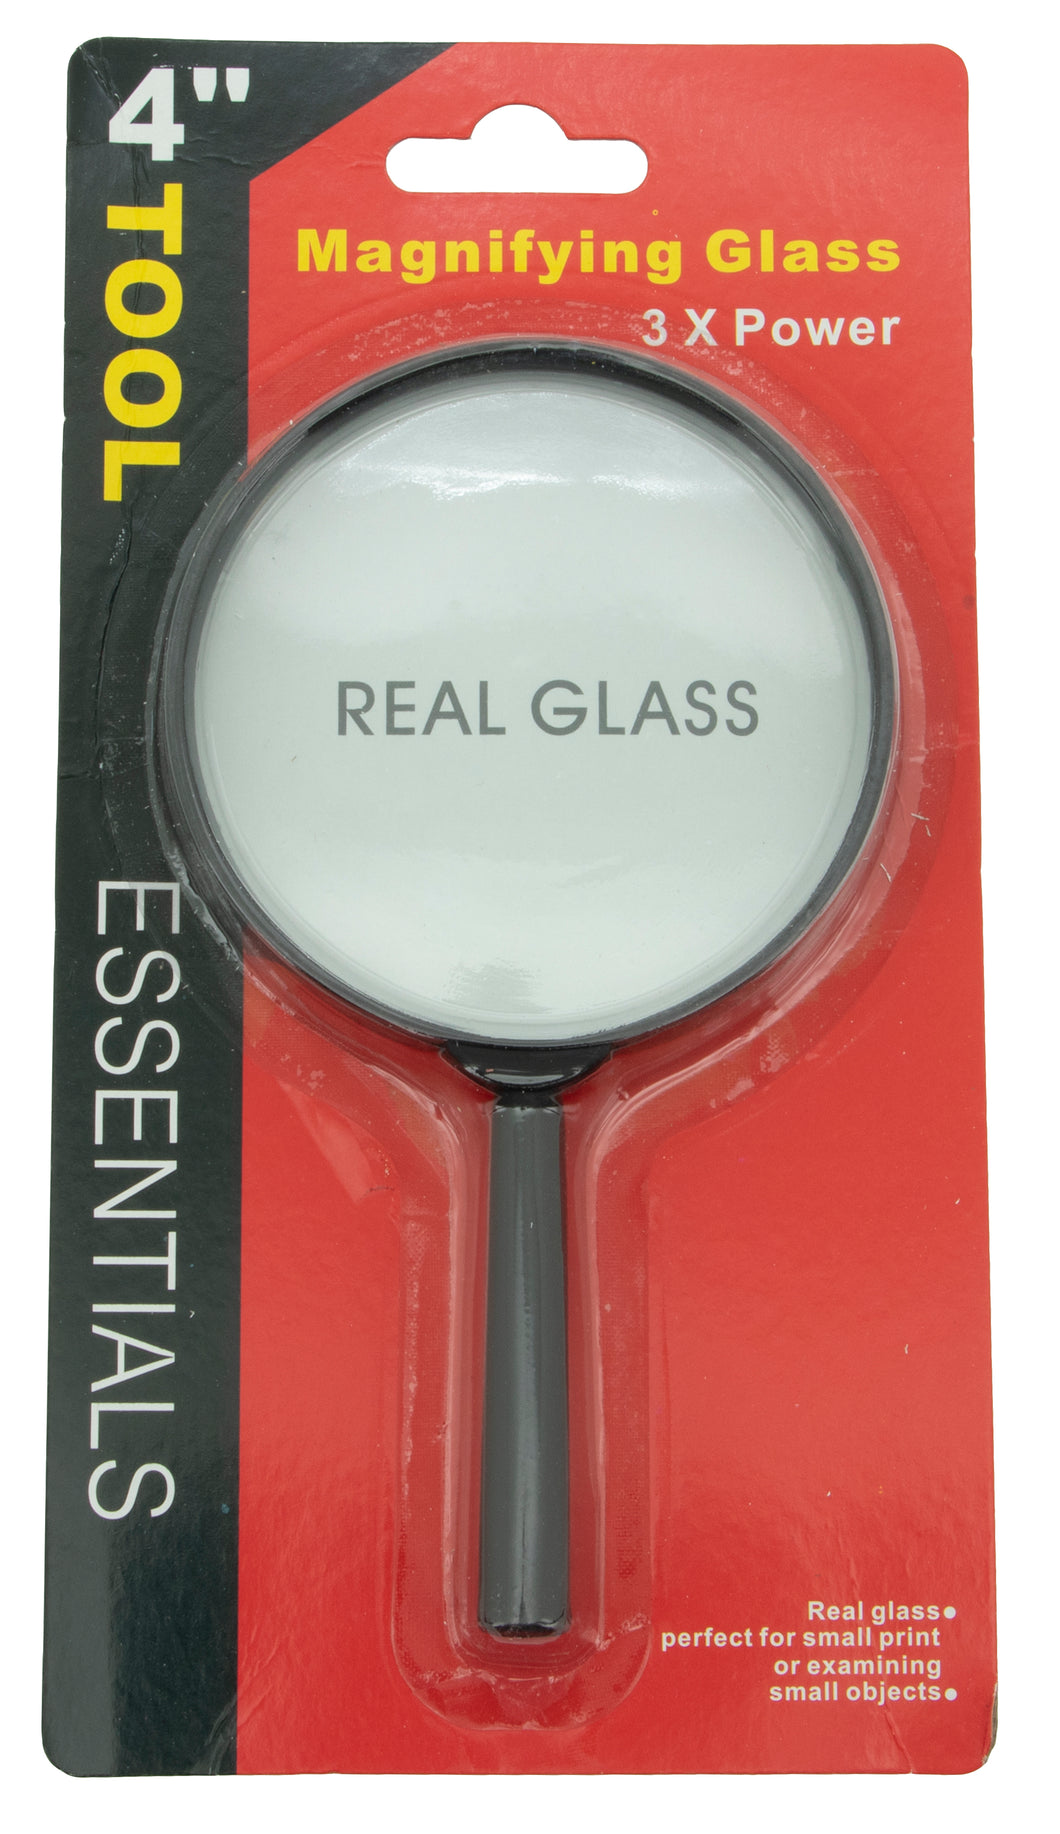 Magnifying Glass 4